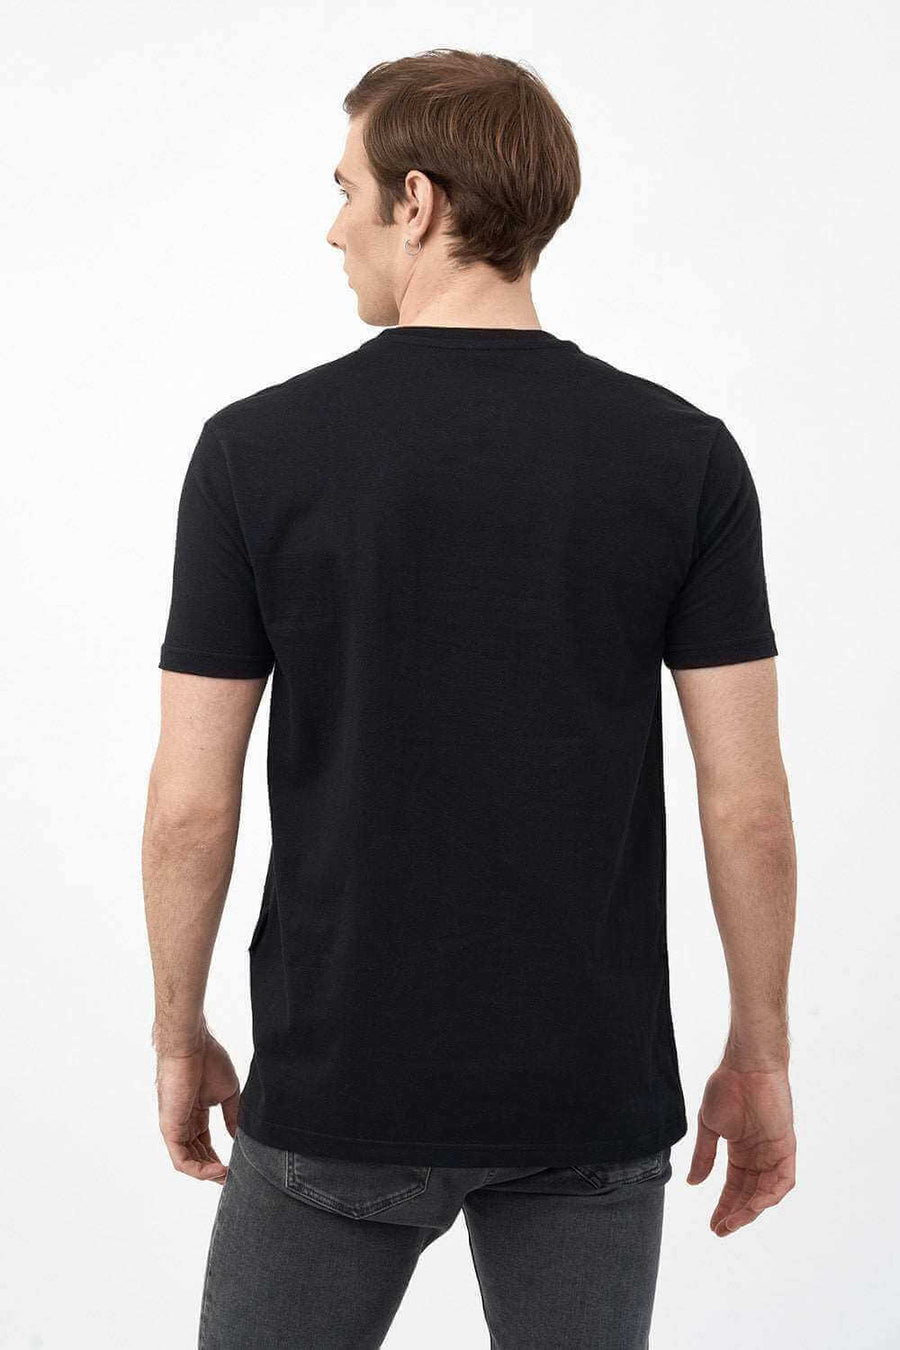 Back View of Men's Short Sleeve Shirts in Black